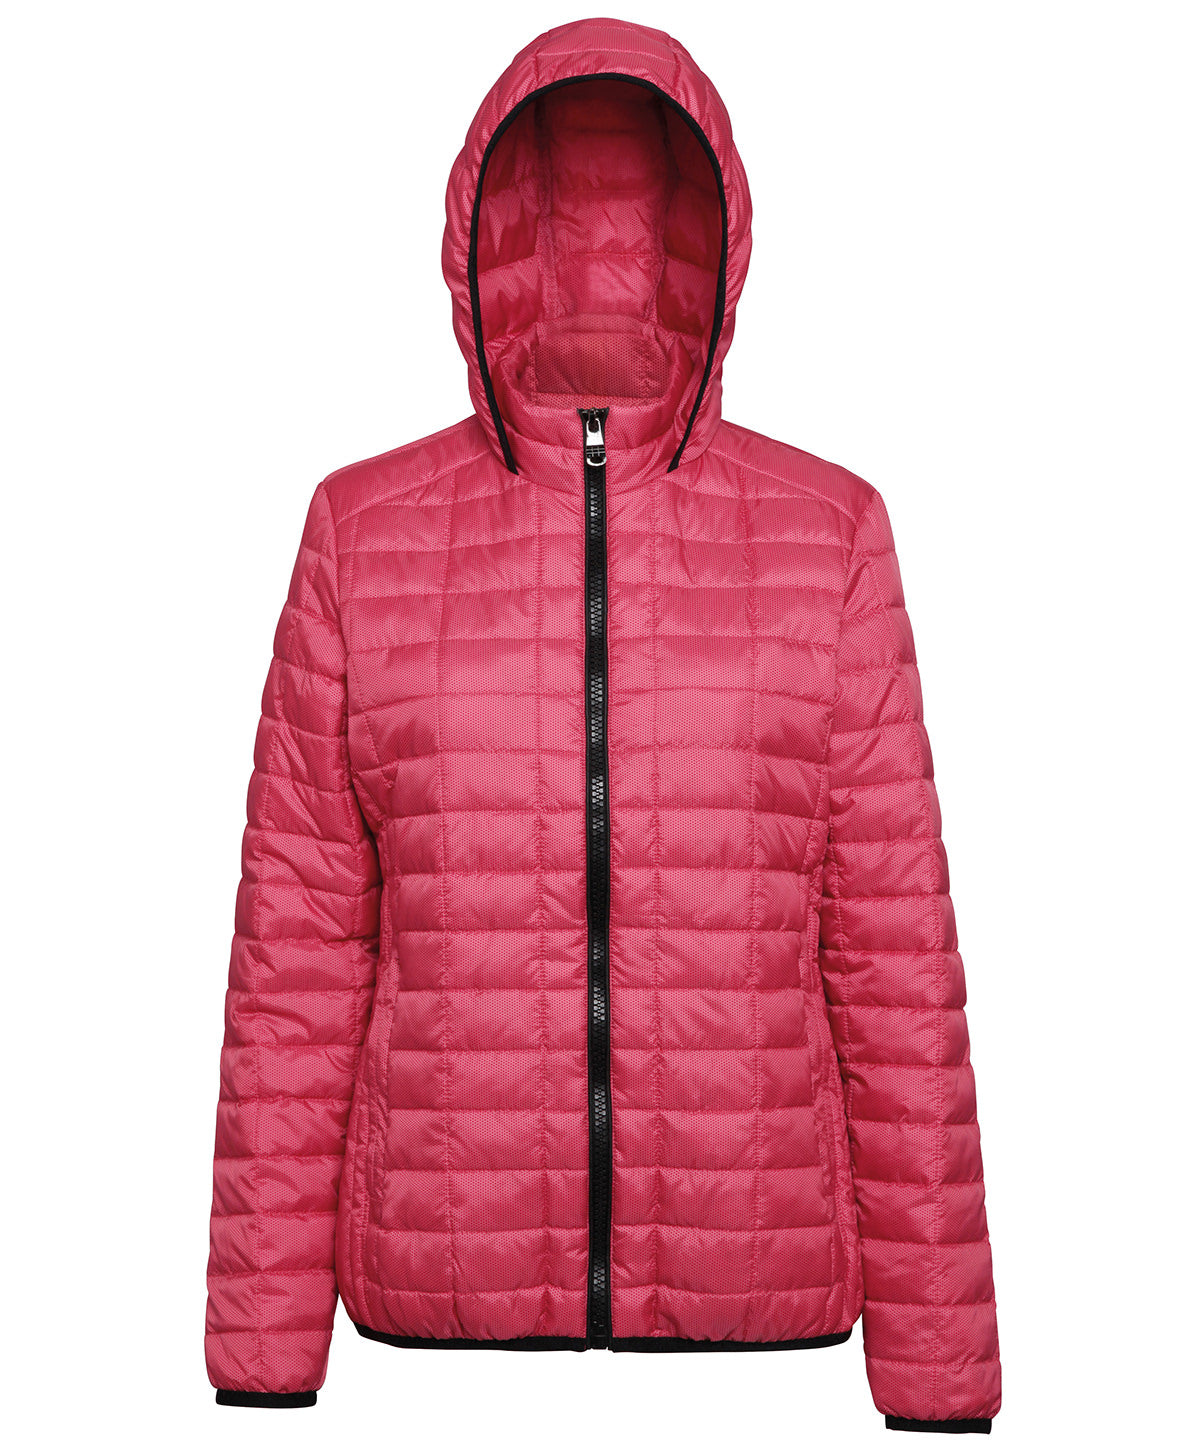 Womens honeycomb hooded jacket | Red